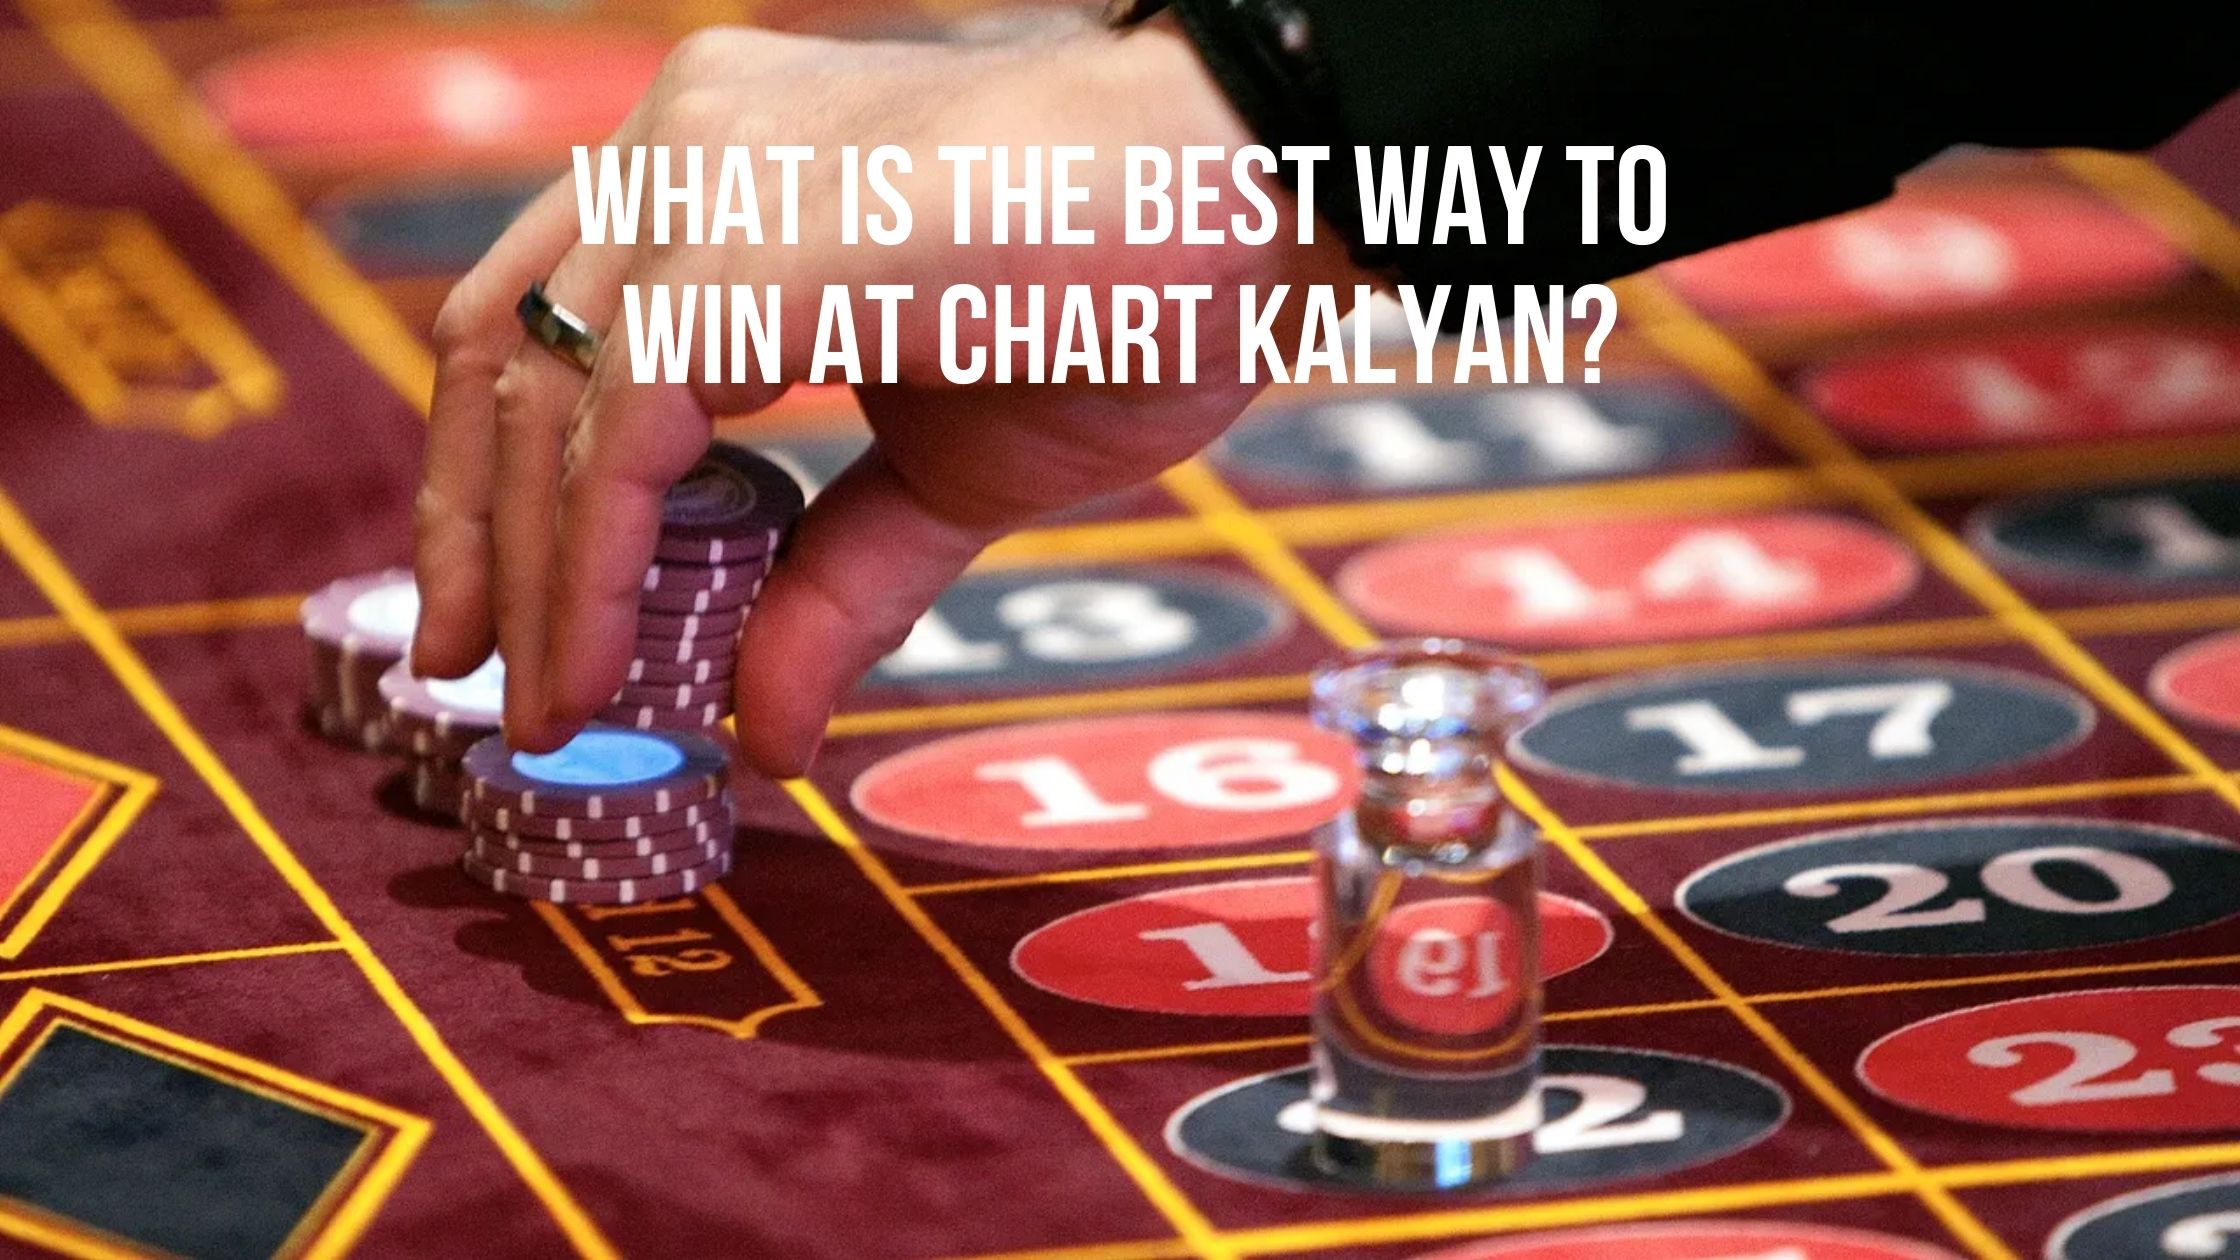 What Is The Best Way To Win At Chart Kalyan?